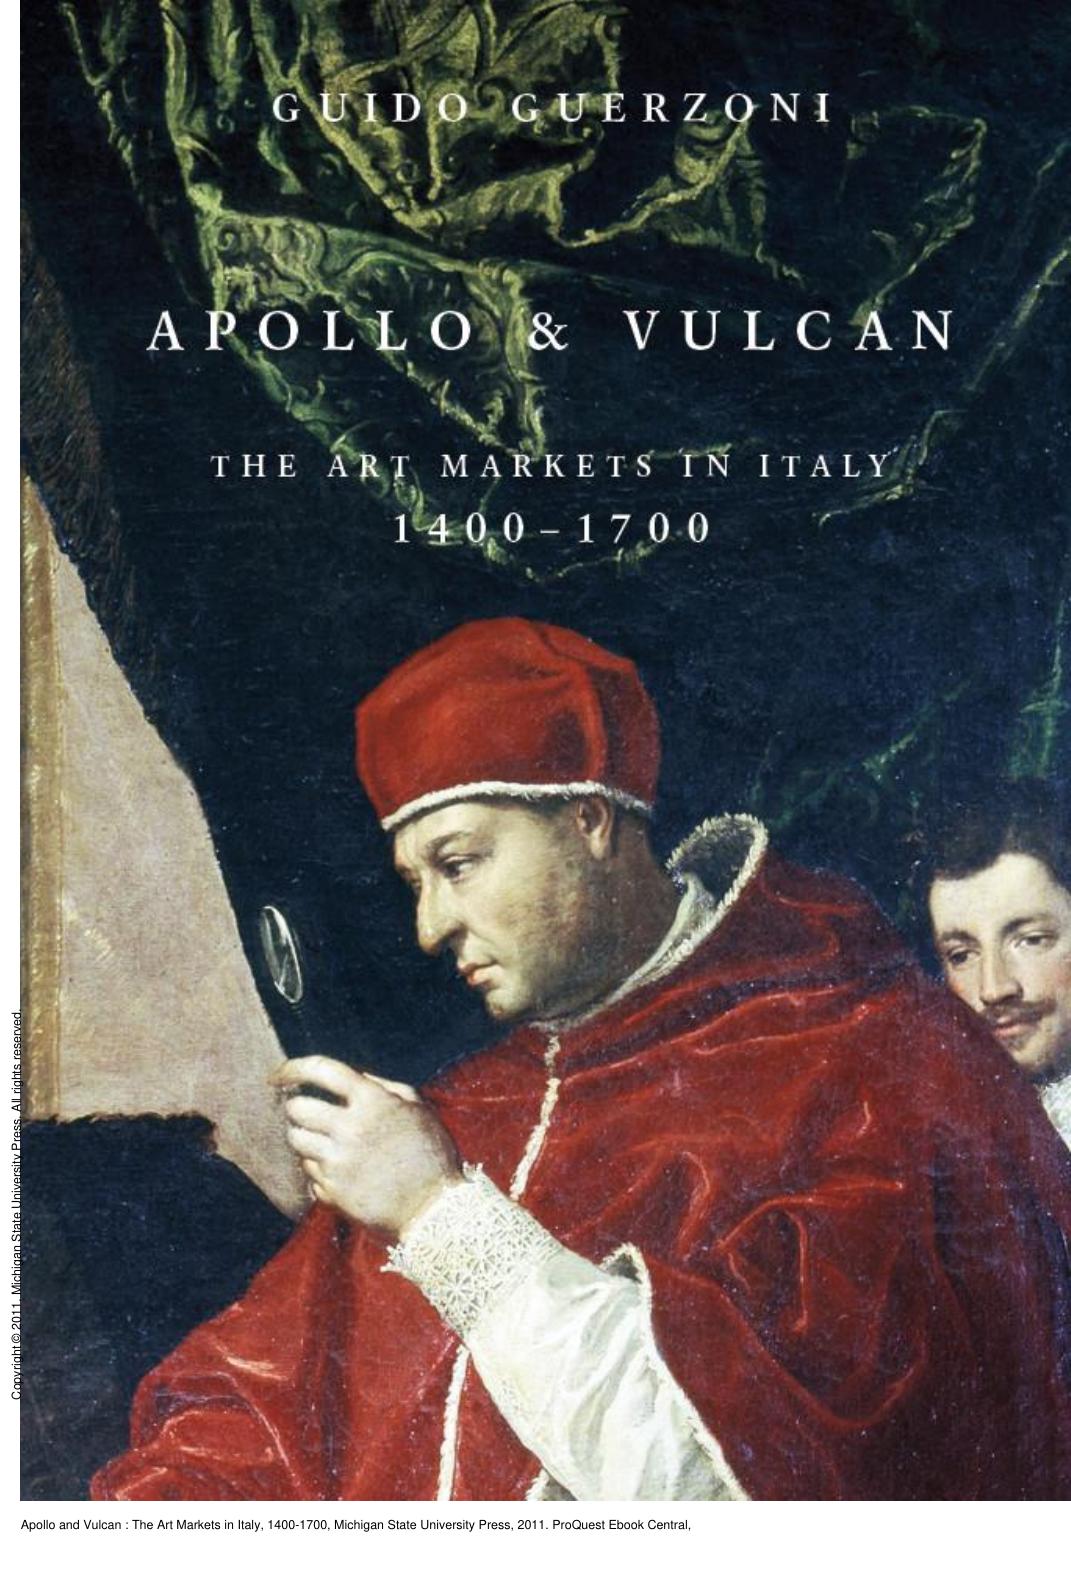 Apollo and Vulcan : The Art Markets in Italy, 1400-1700 by Guido Guerzoni